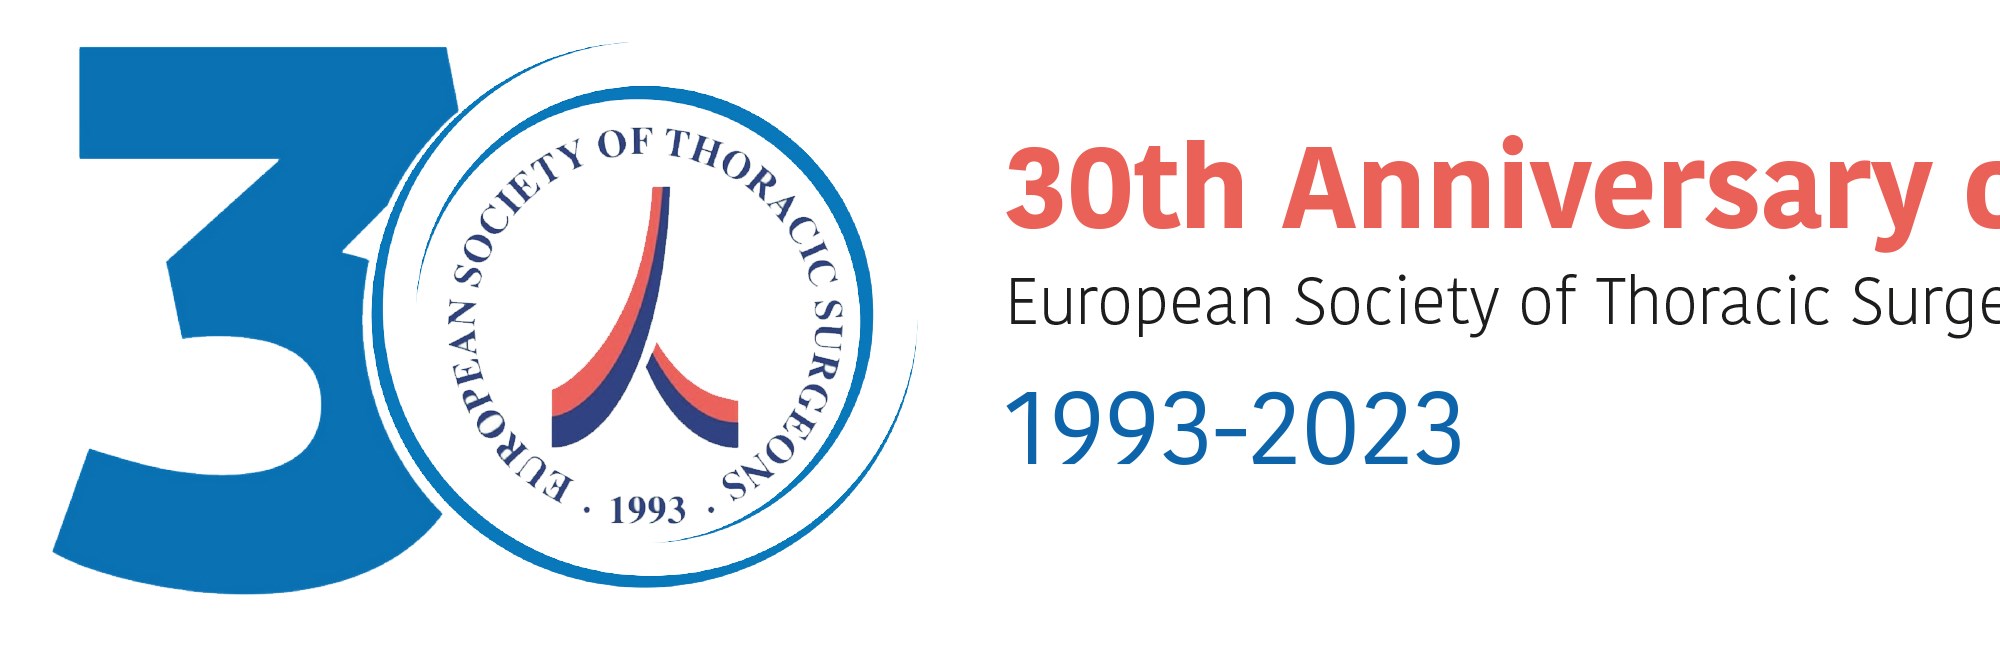 Final Program 31st European Conference on General Thoracic Surgery image